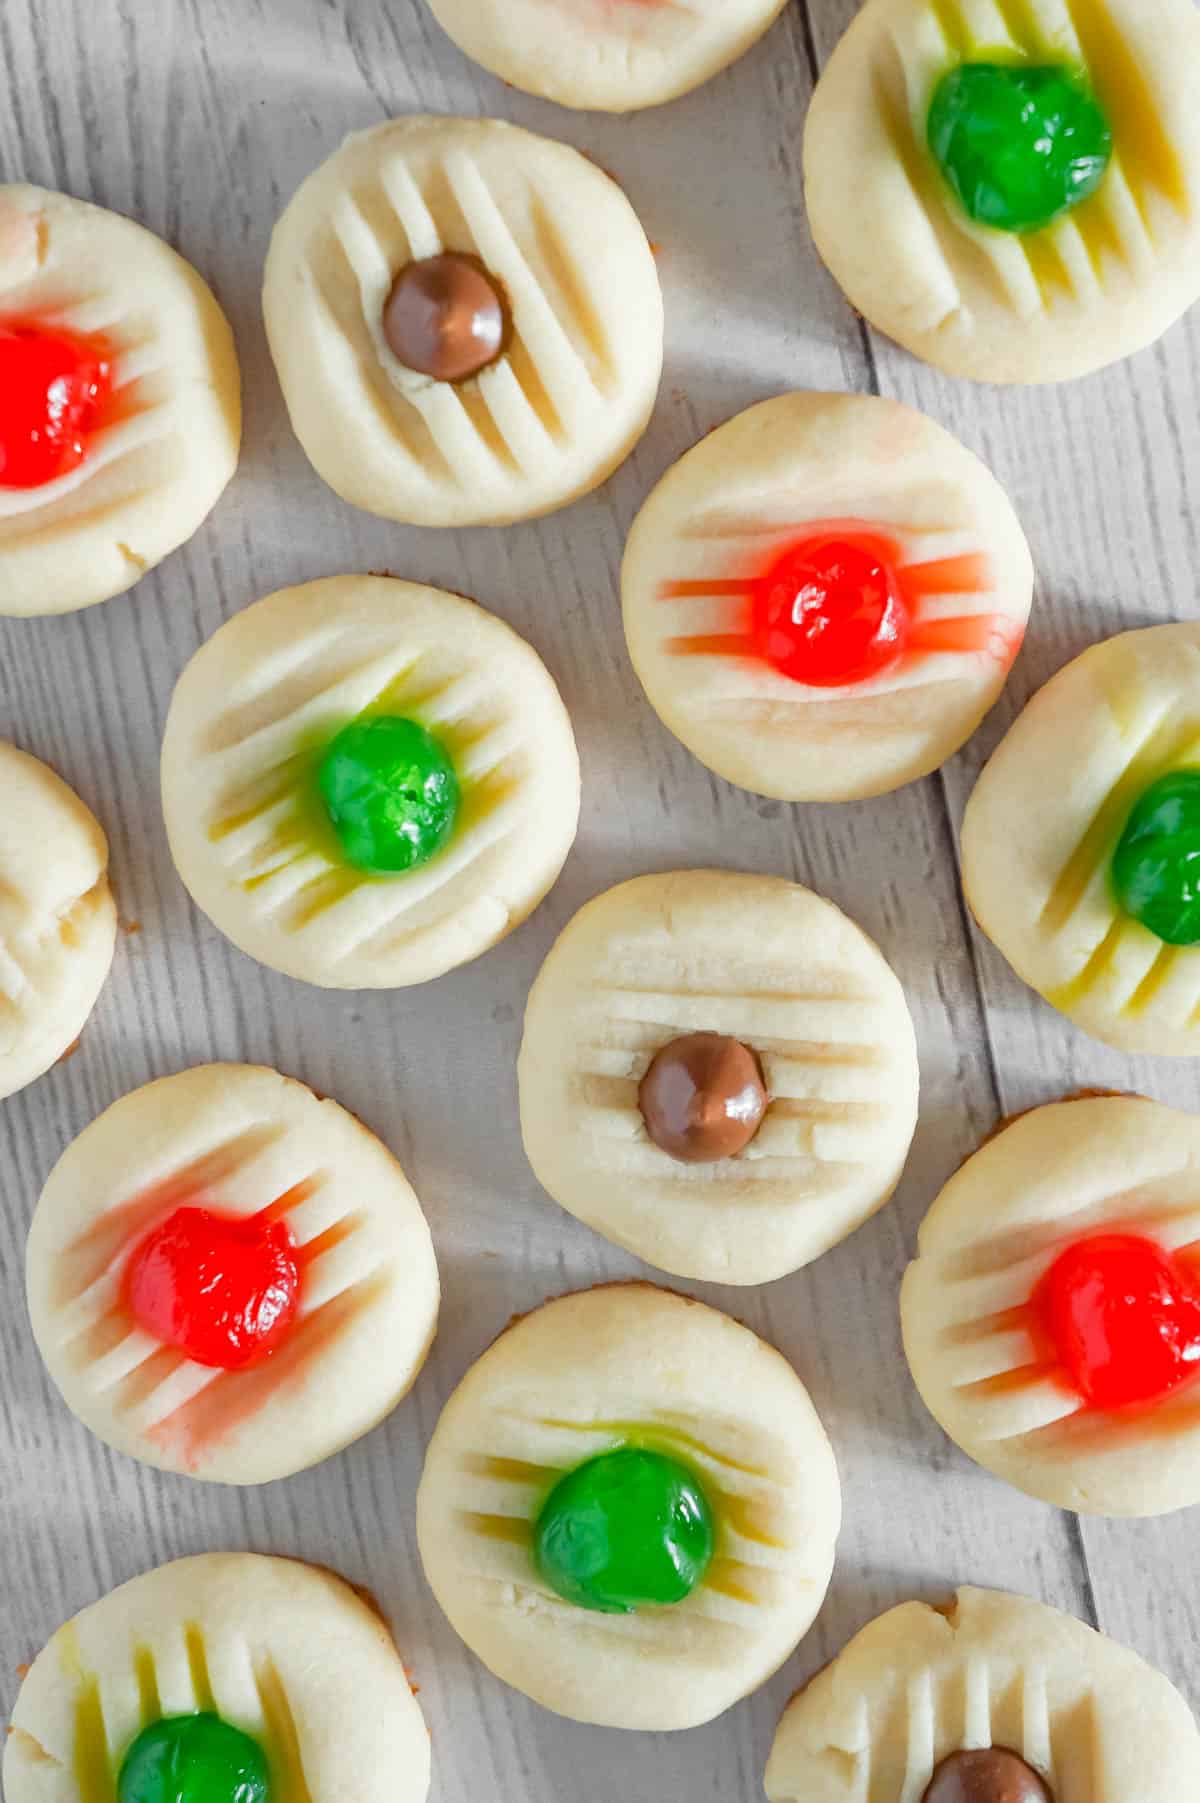 Whipped Christmas Shortbread Cookies are a buttery holiday cookie recipe that can be topped with maraschino cherries and Hershey's mini kisses.